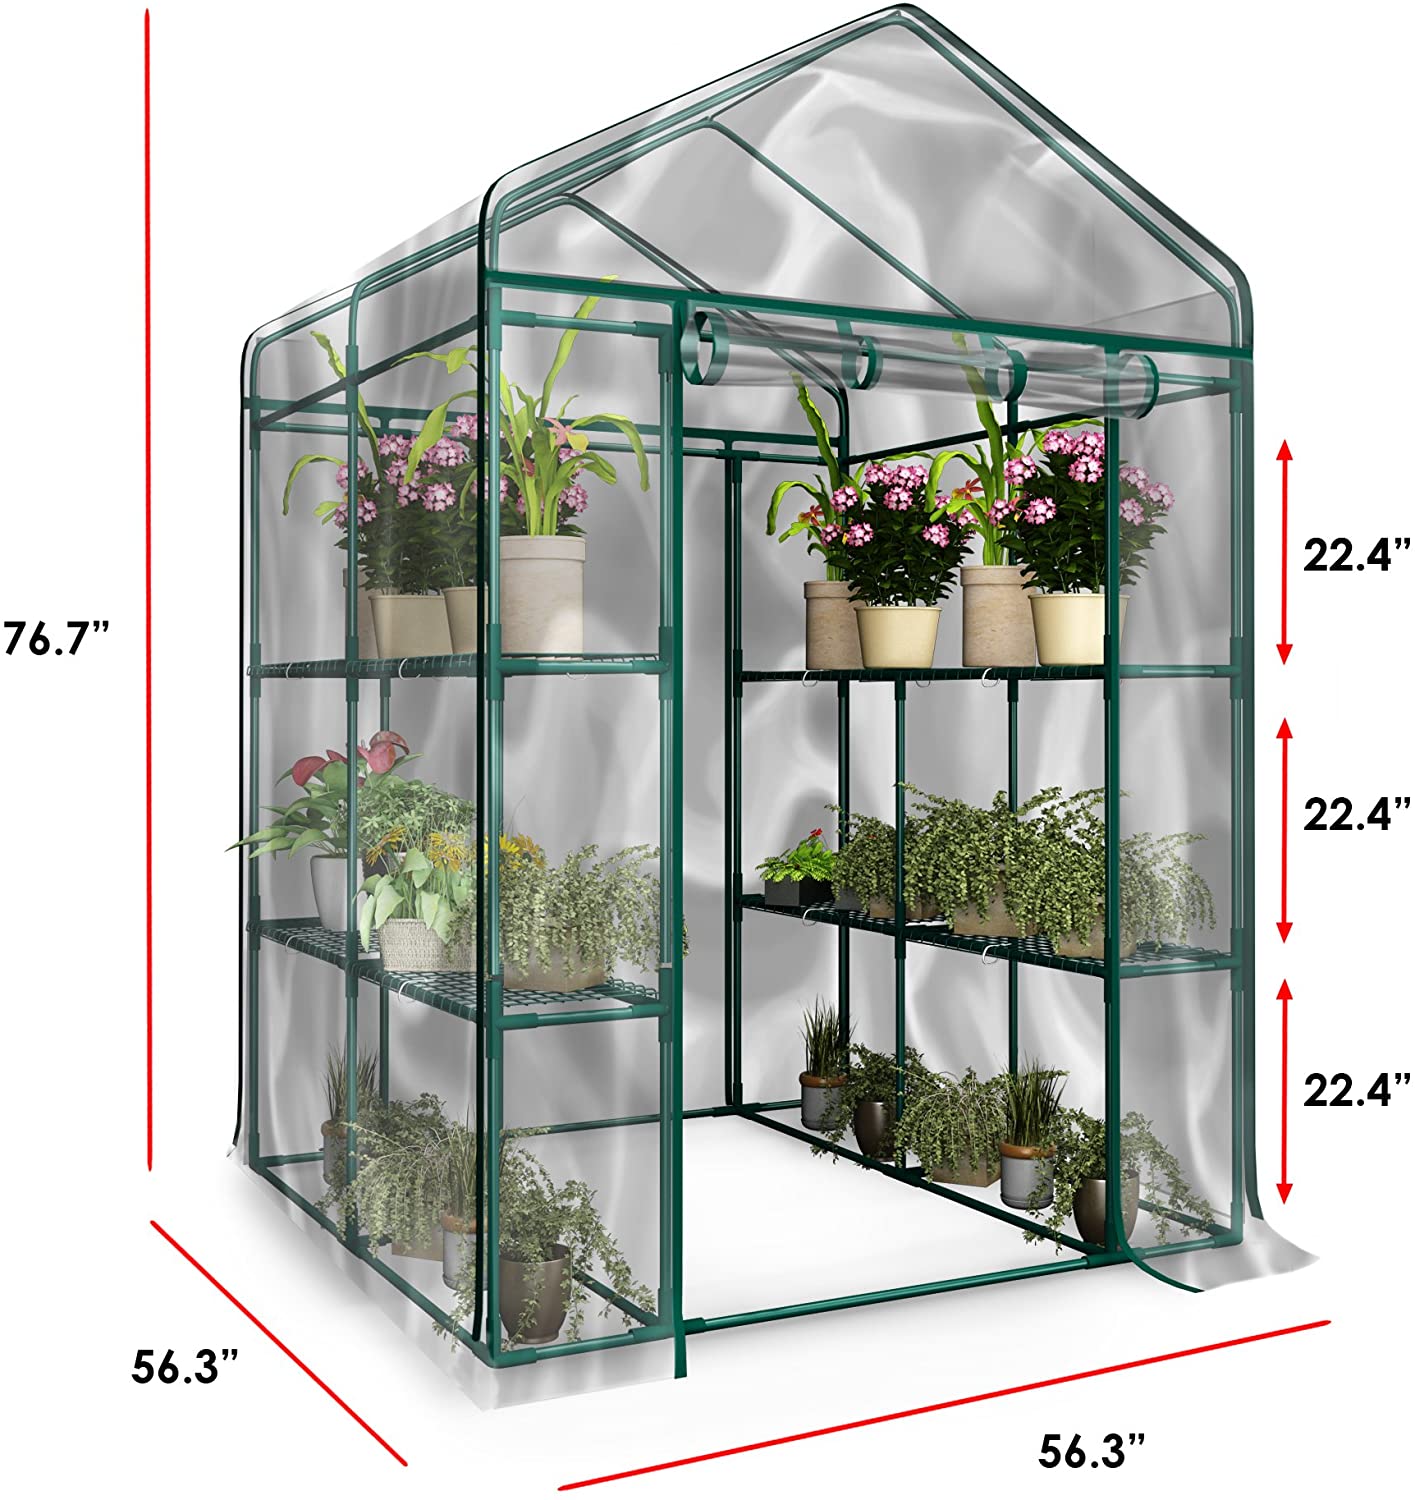 Home-Complete HC-4202 Walk-In Greenhouse- Indoor Outdoor with 8 Sturdy Shelves-Grow Plants, Seedlings, Herbs, or Flowers In Any Season-Gardening Rack - image 2 of 8